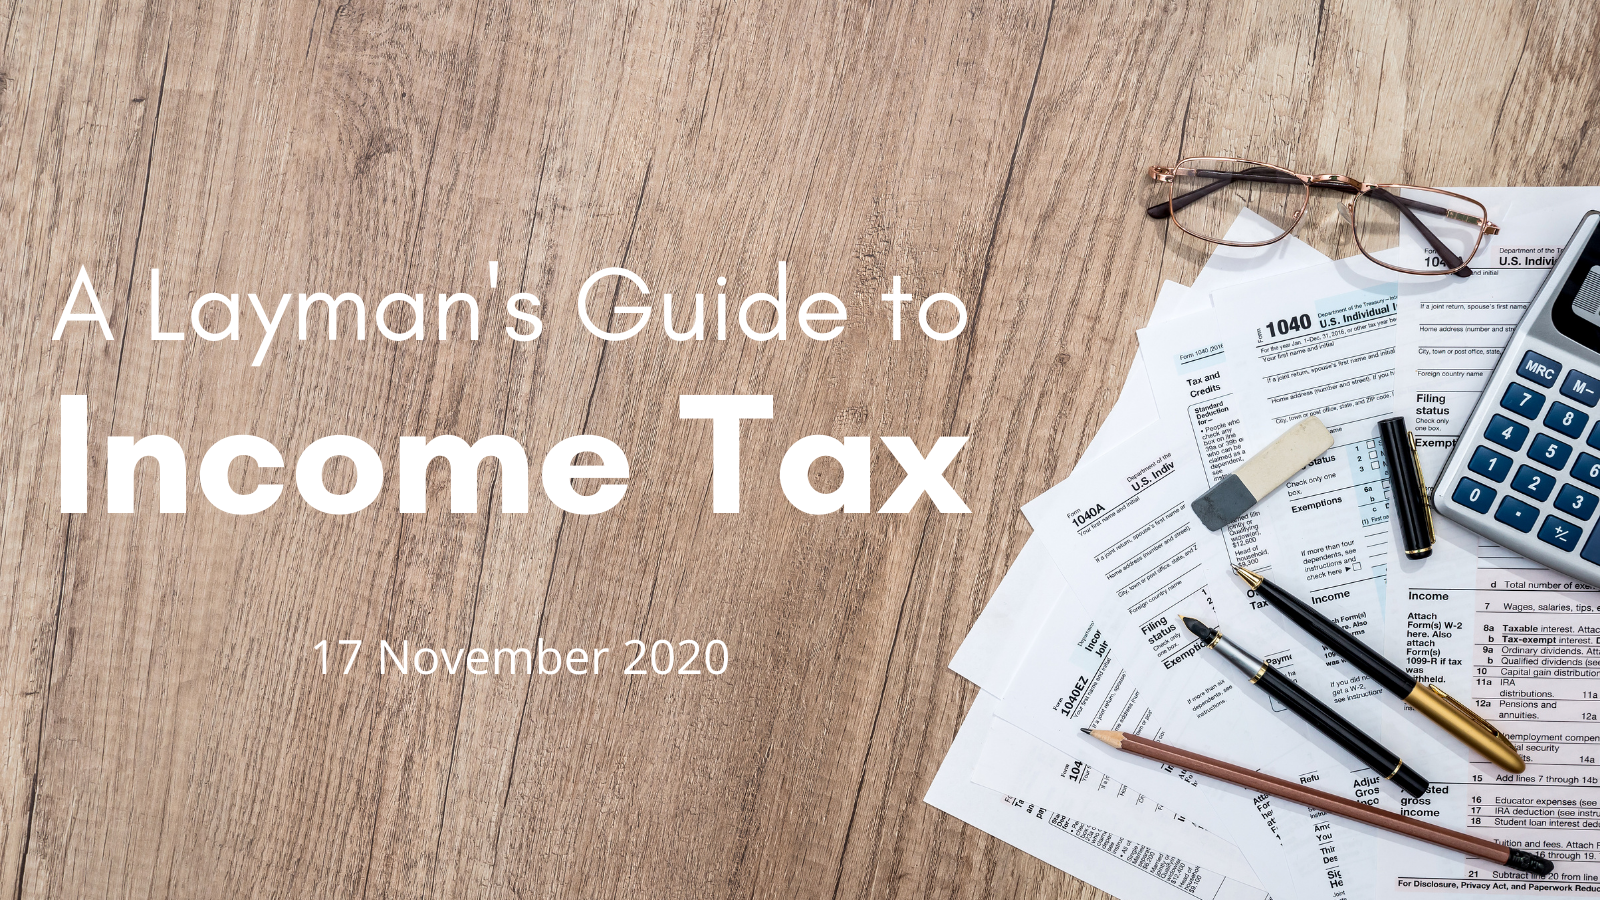 A Layman's Guide to Income Tax